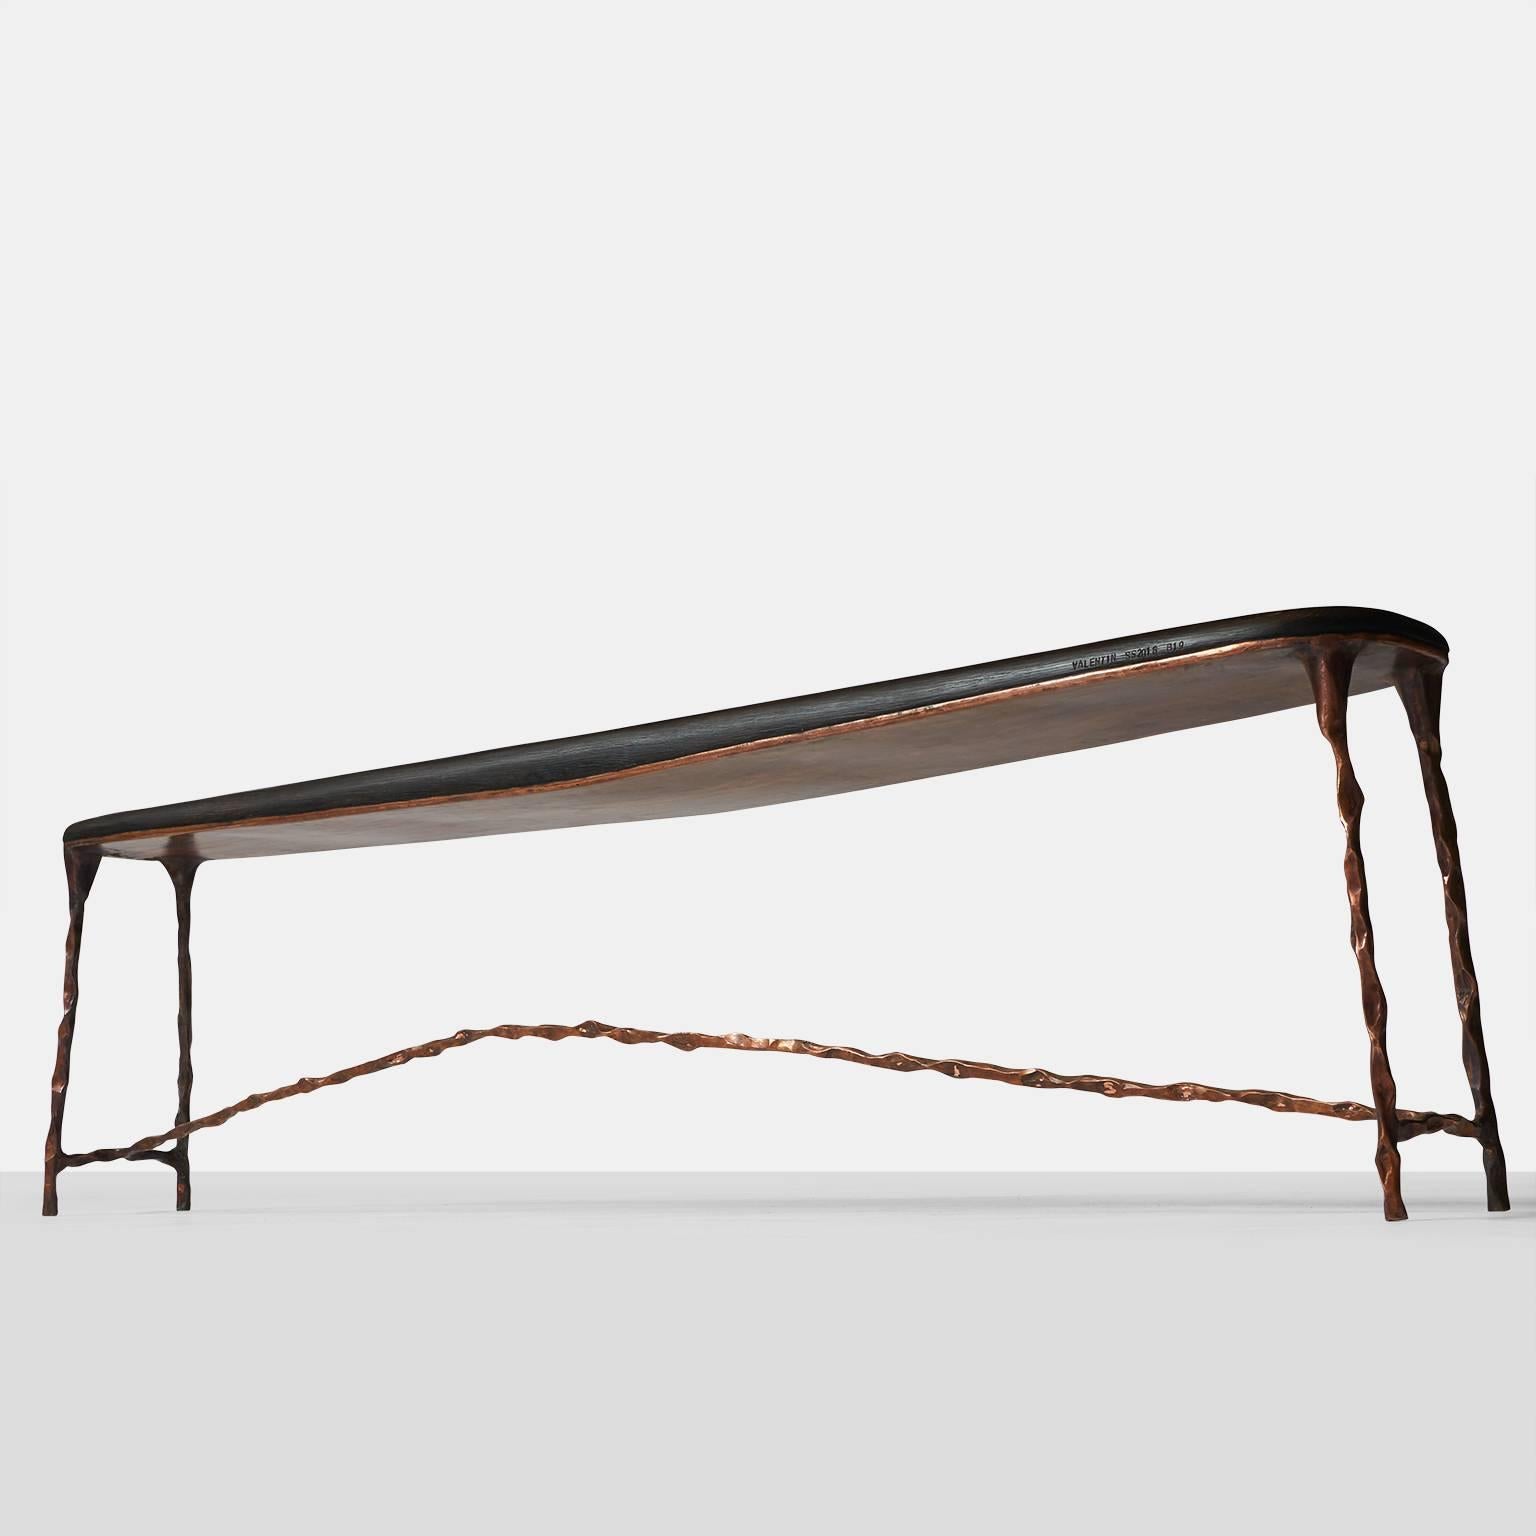 A large copper frame bench with a blackened oak seat. Completely handmade with all copper work being hand-forged with exceptional detail. 

Each piece is completely handmade by Valentin Loellmann, all are signed and numbered.  With all custom